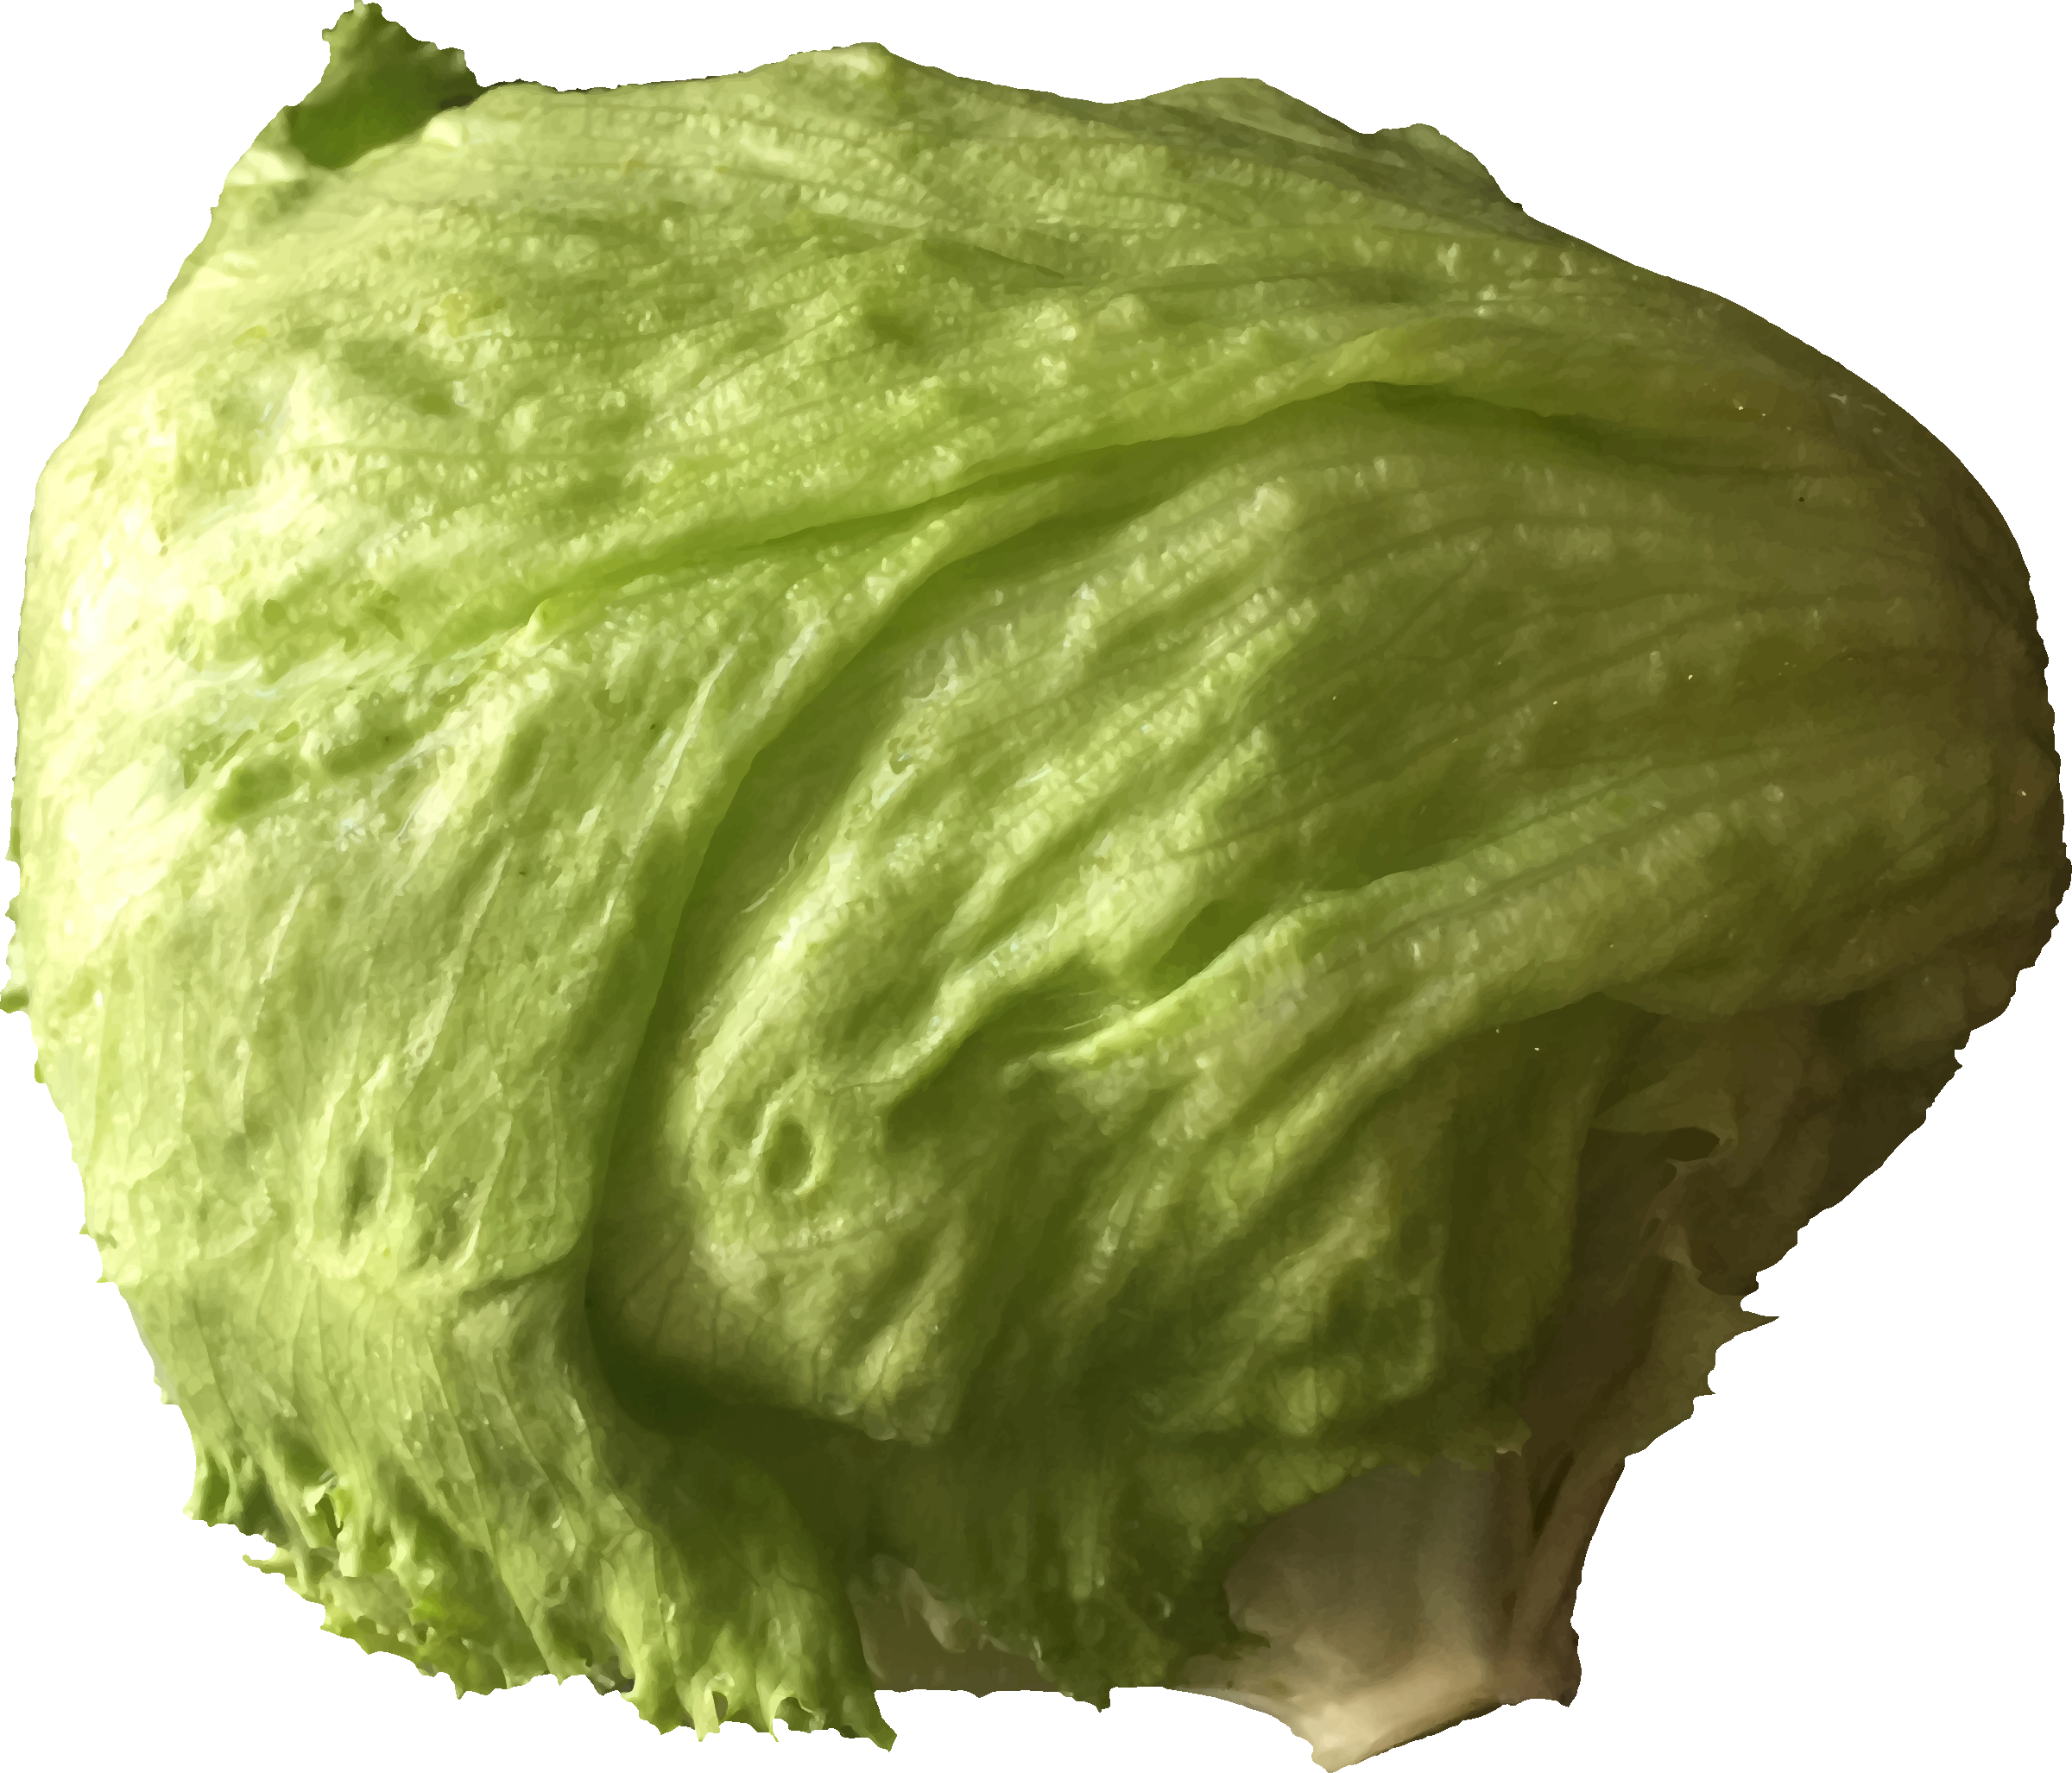 A Green Lettuce On A Black Background